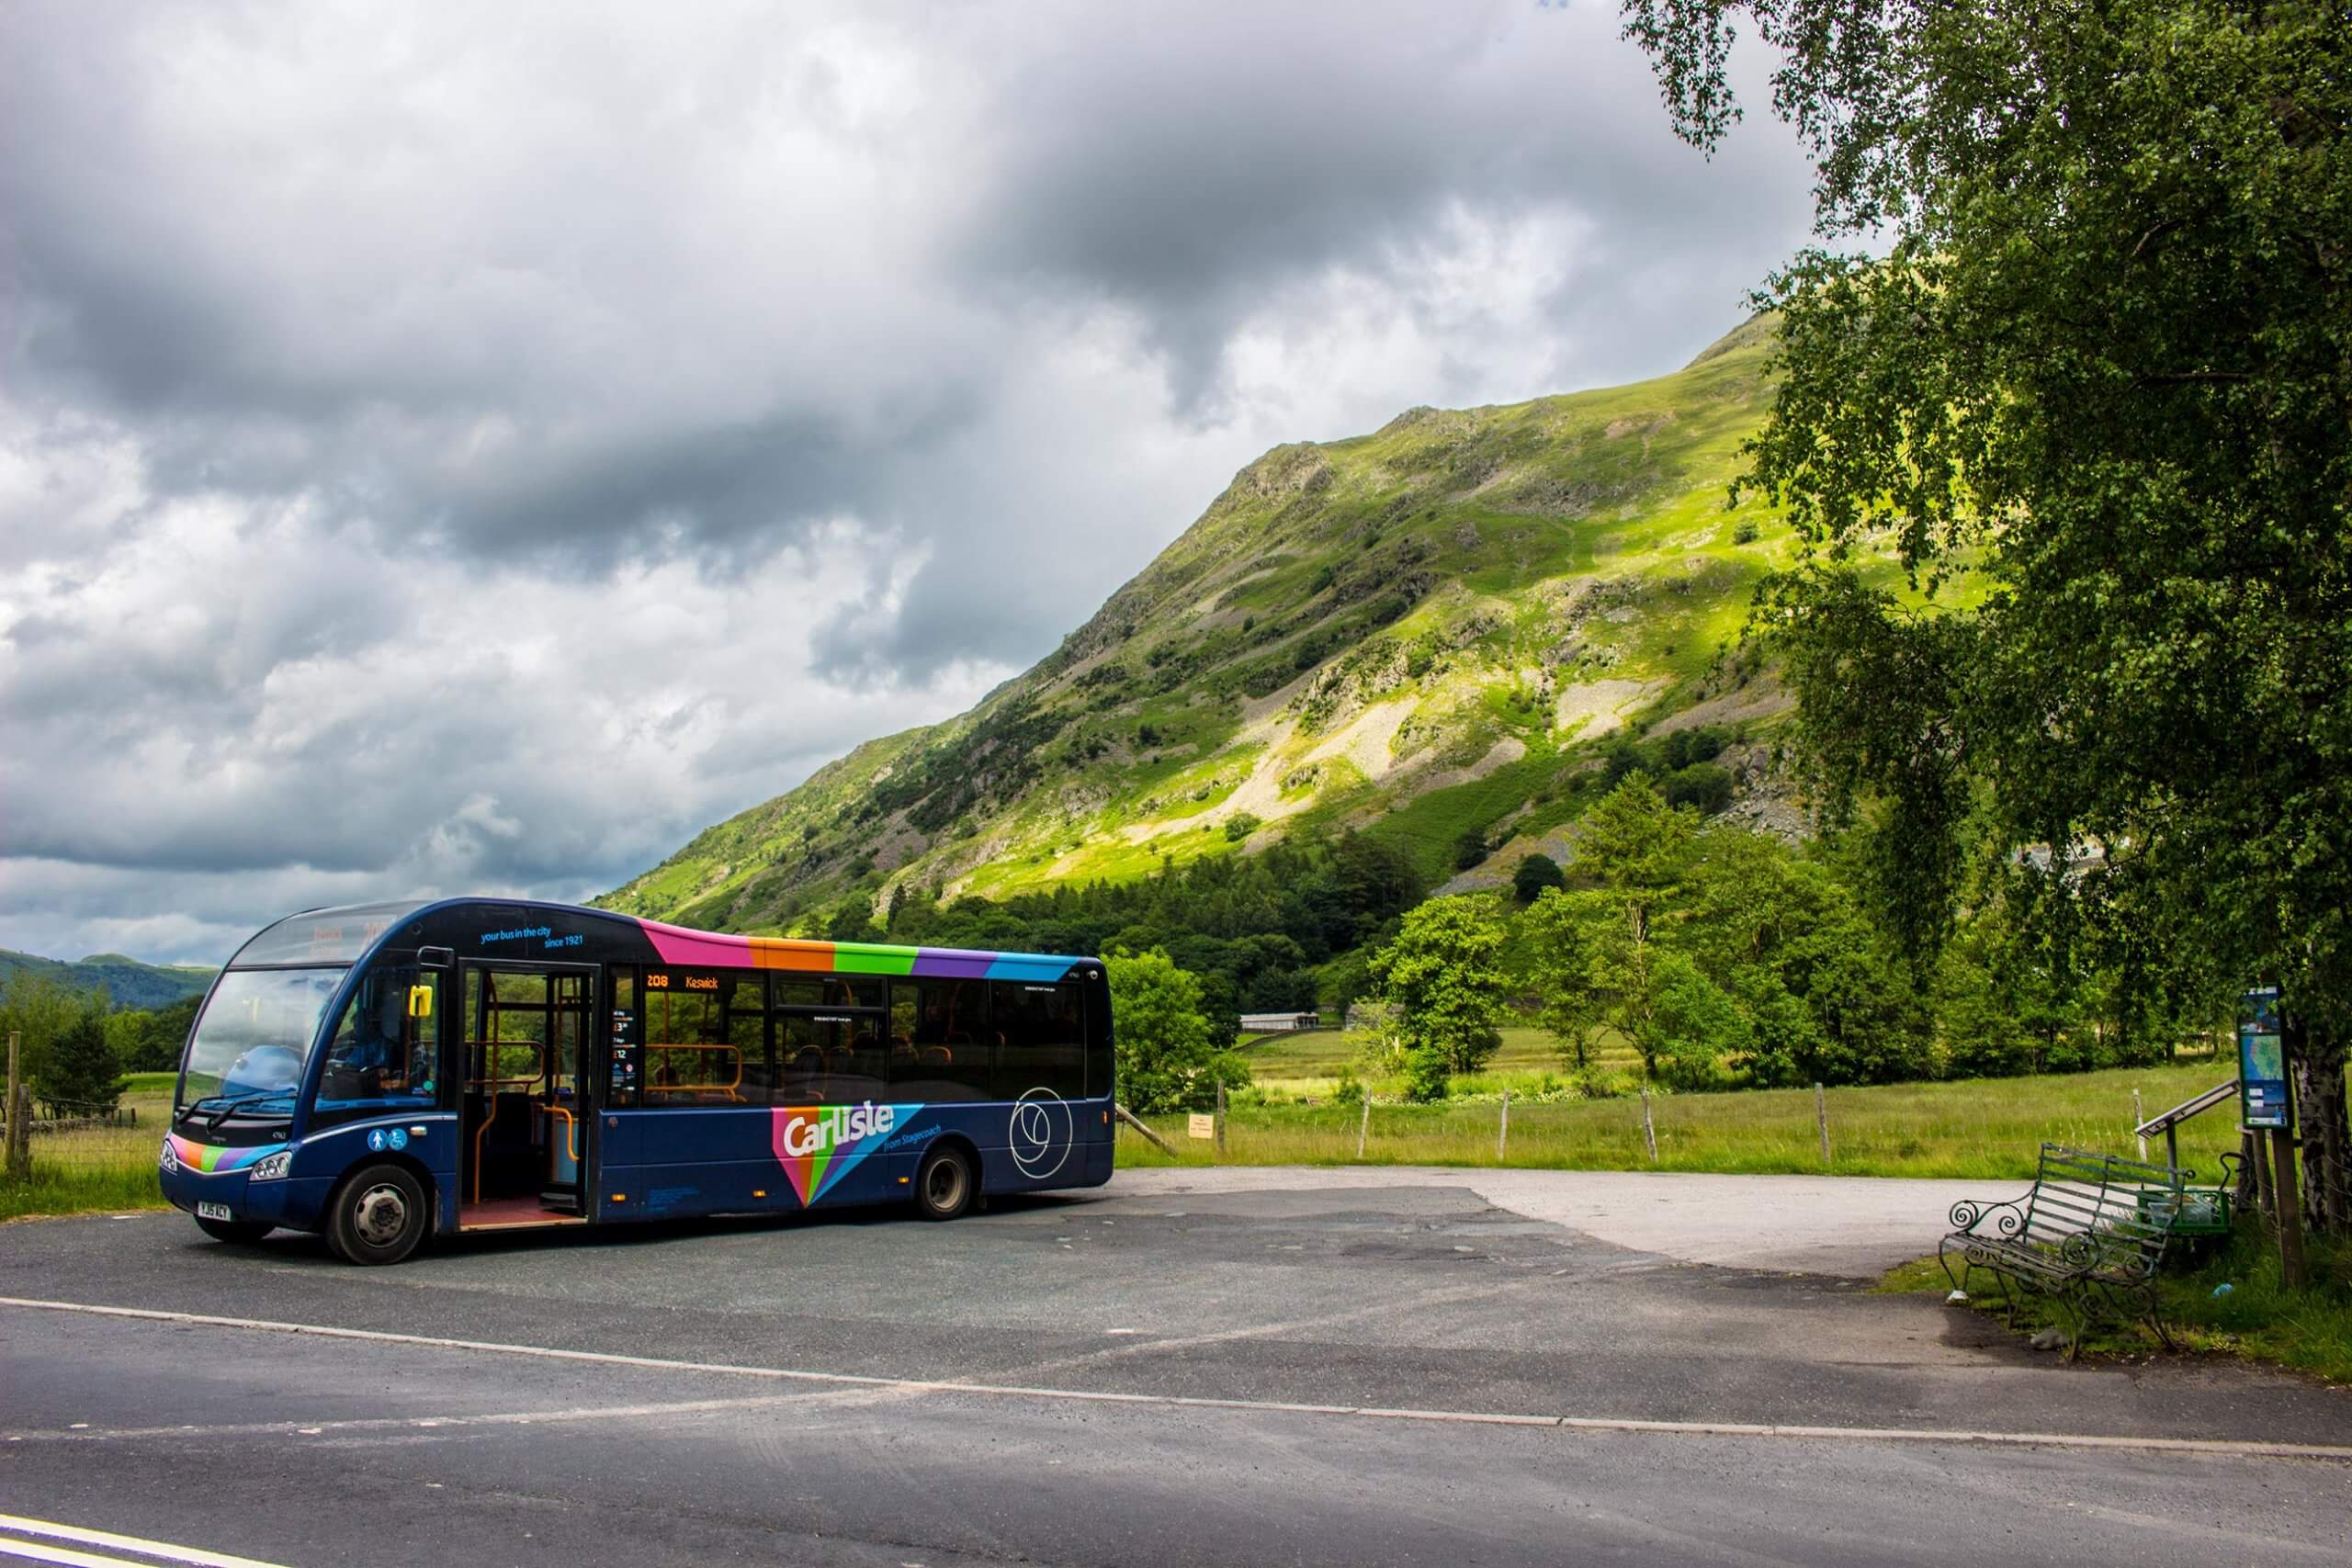 Stagecoach 78 bus at Patterdale in the Lake District